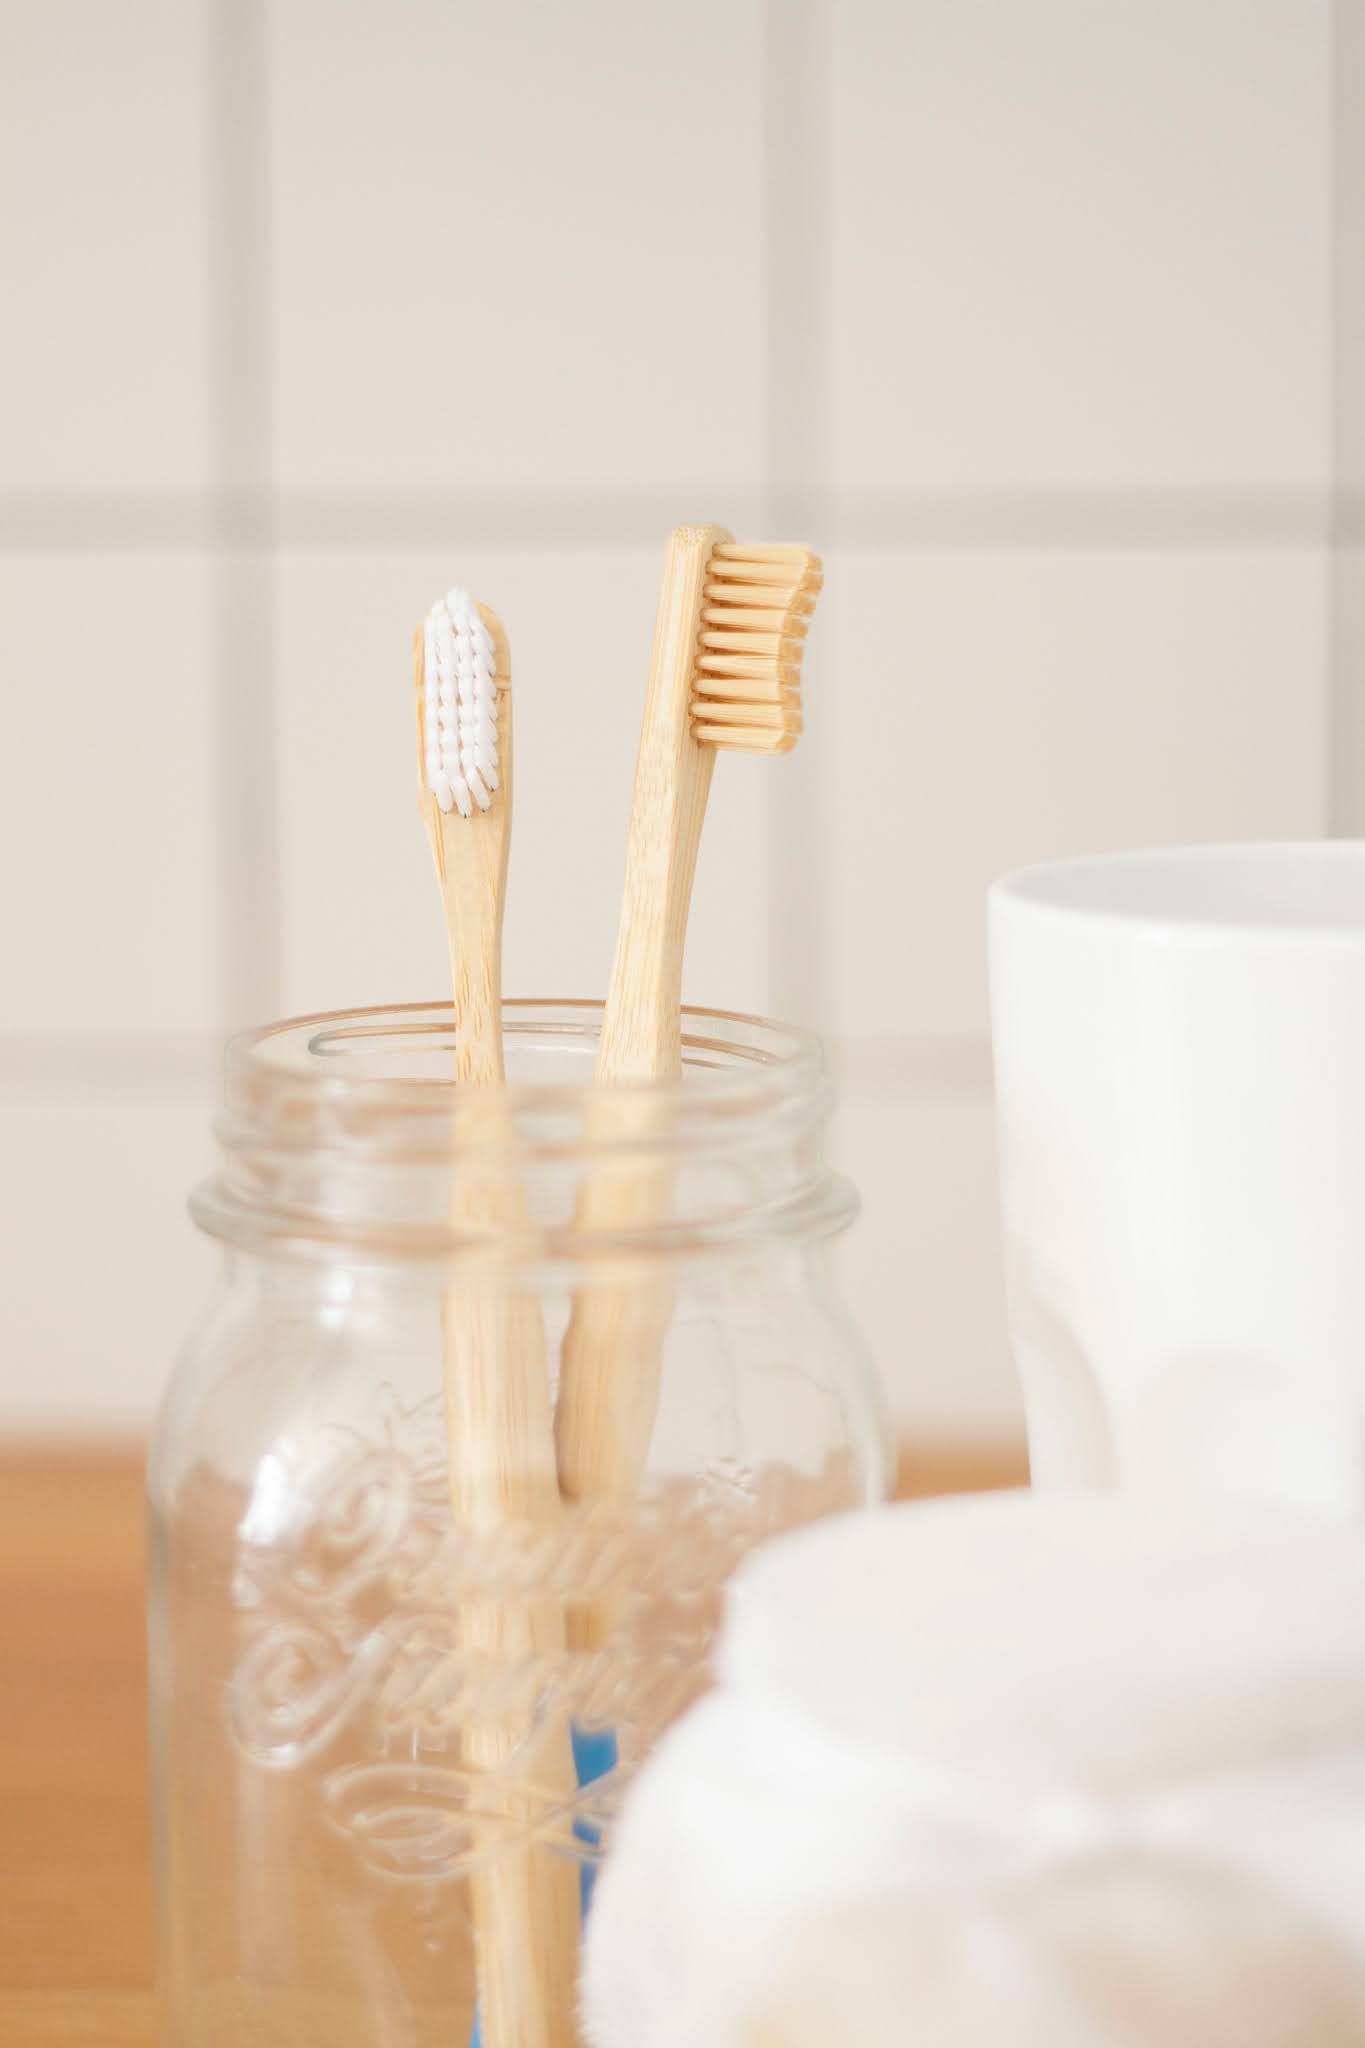 bamboo toothbrushes in a cup